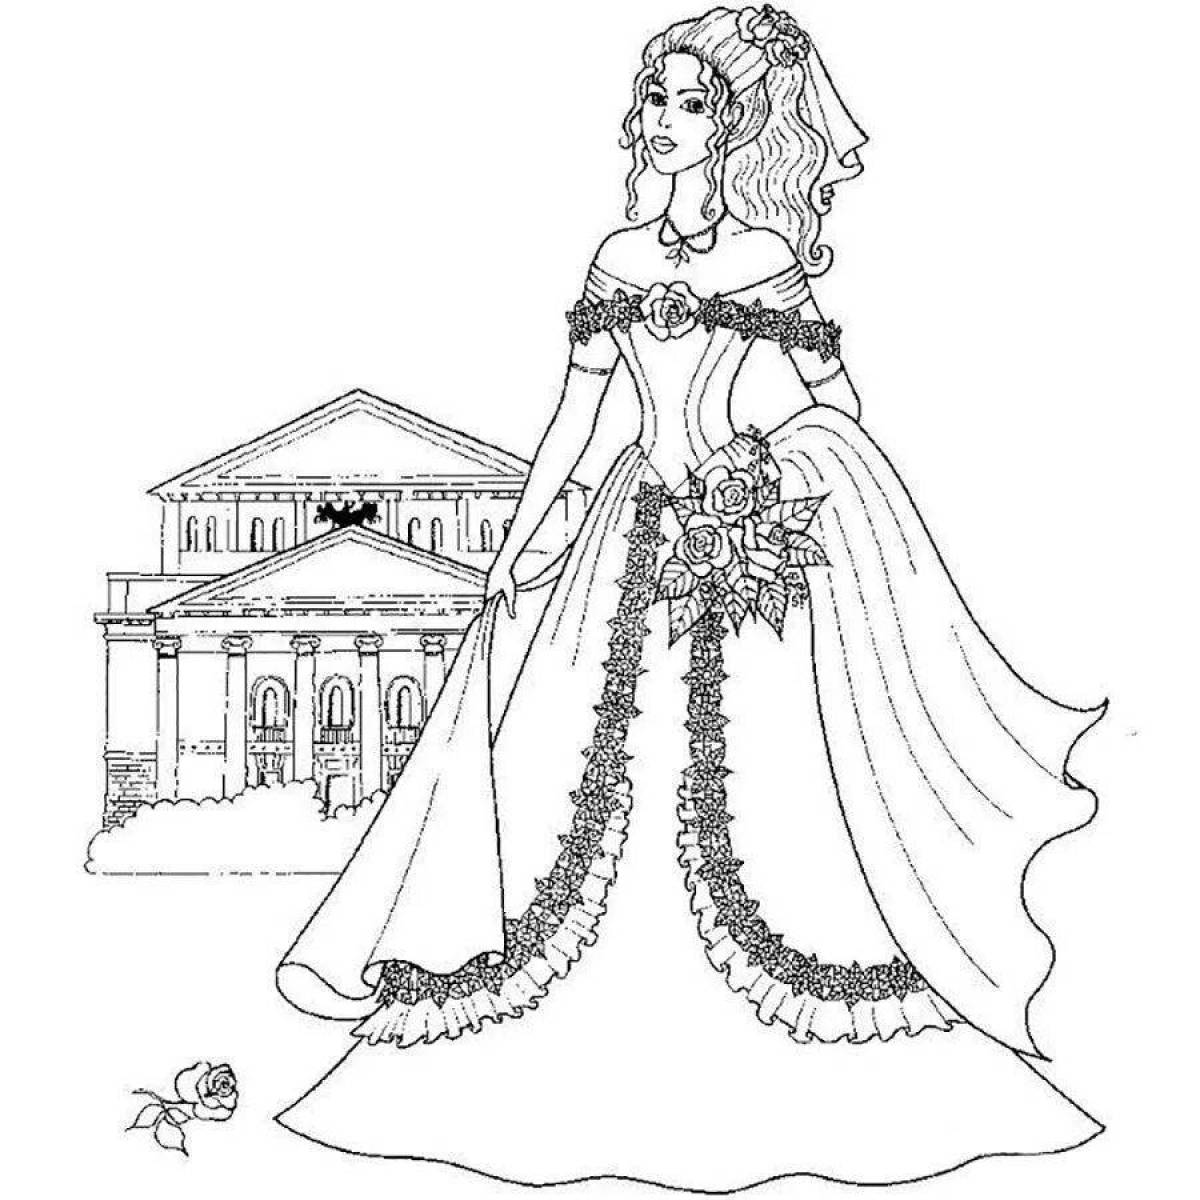 Exquisite queen barbie coloring page